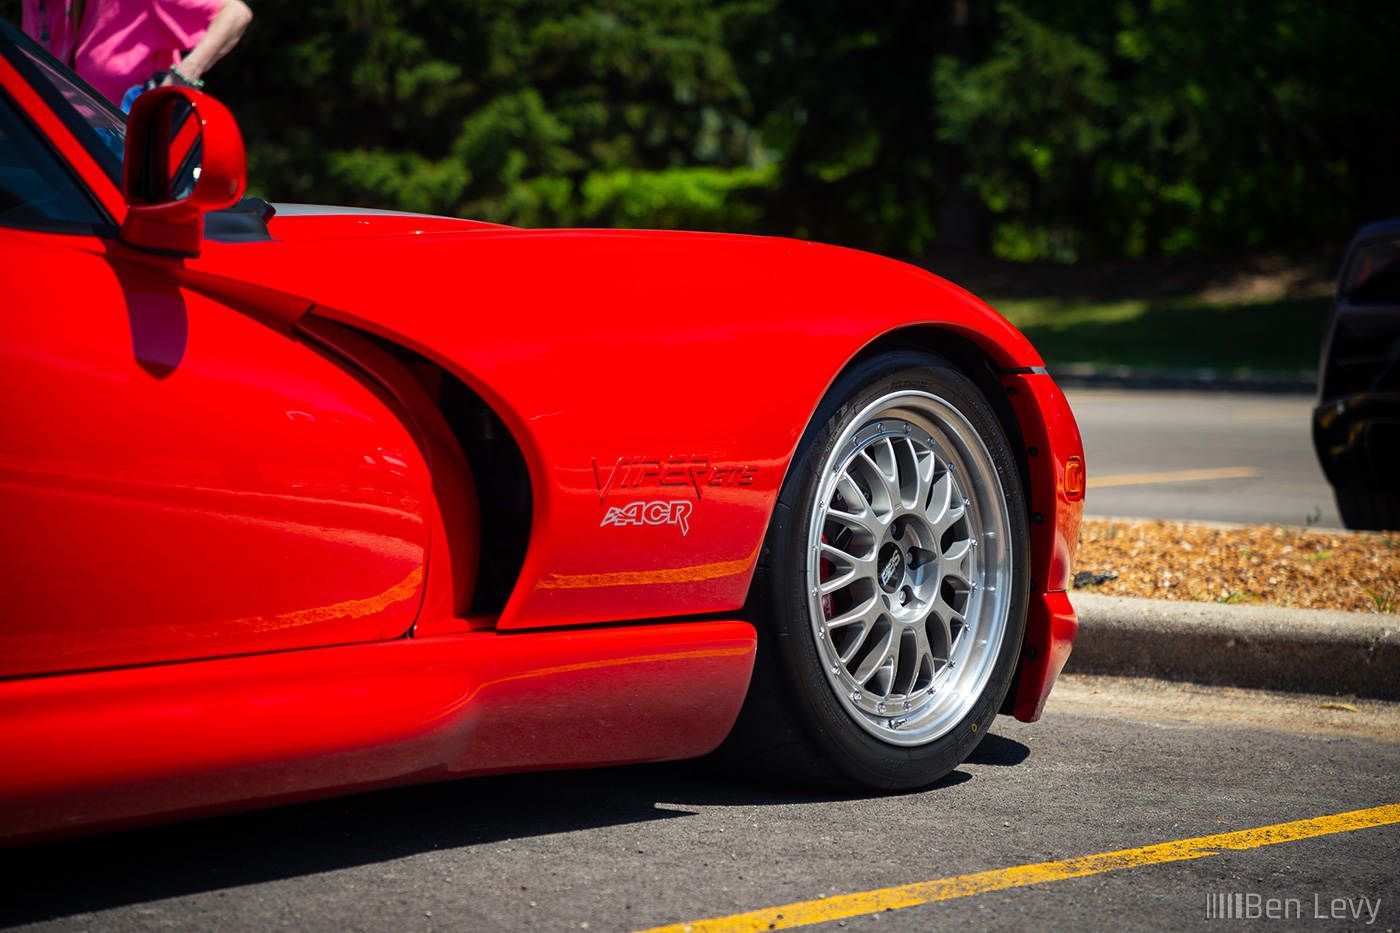 Front Fender of Red Dodge Viper ACR